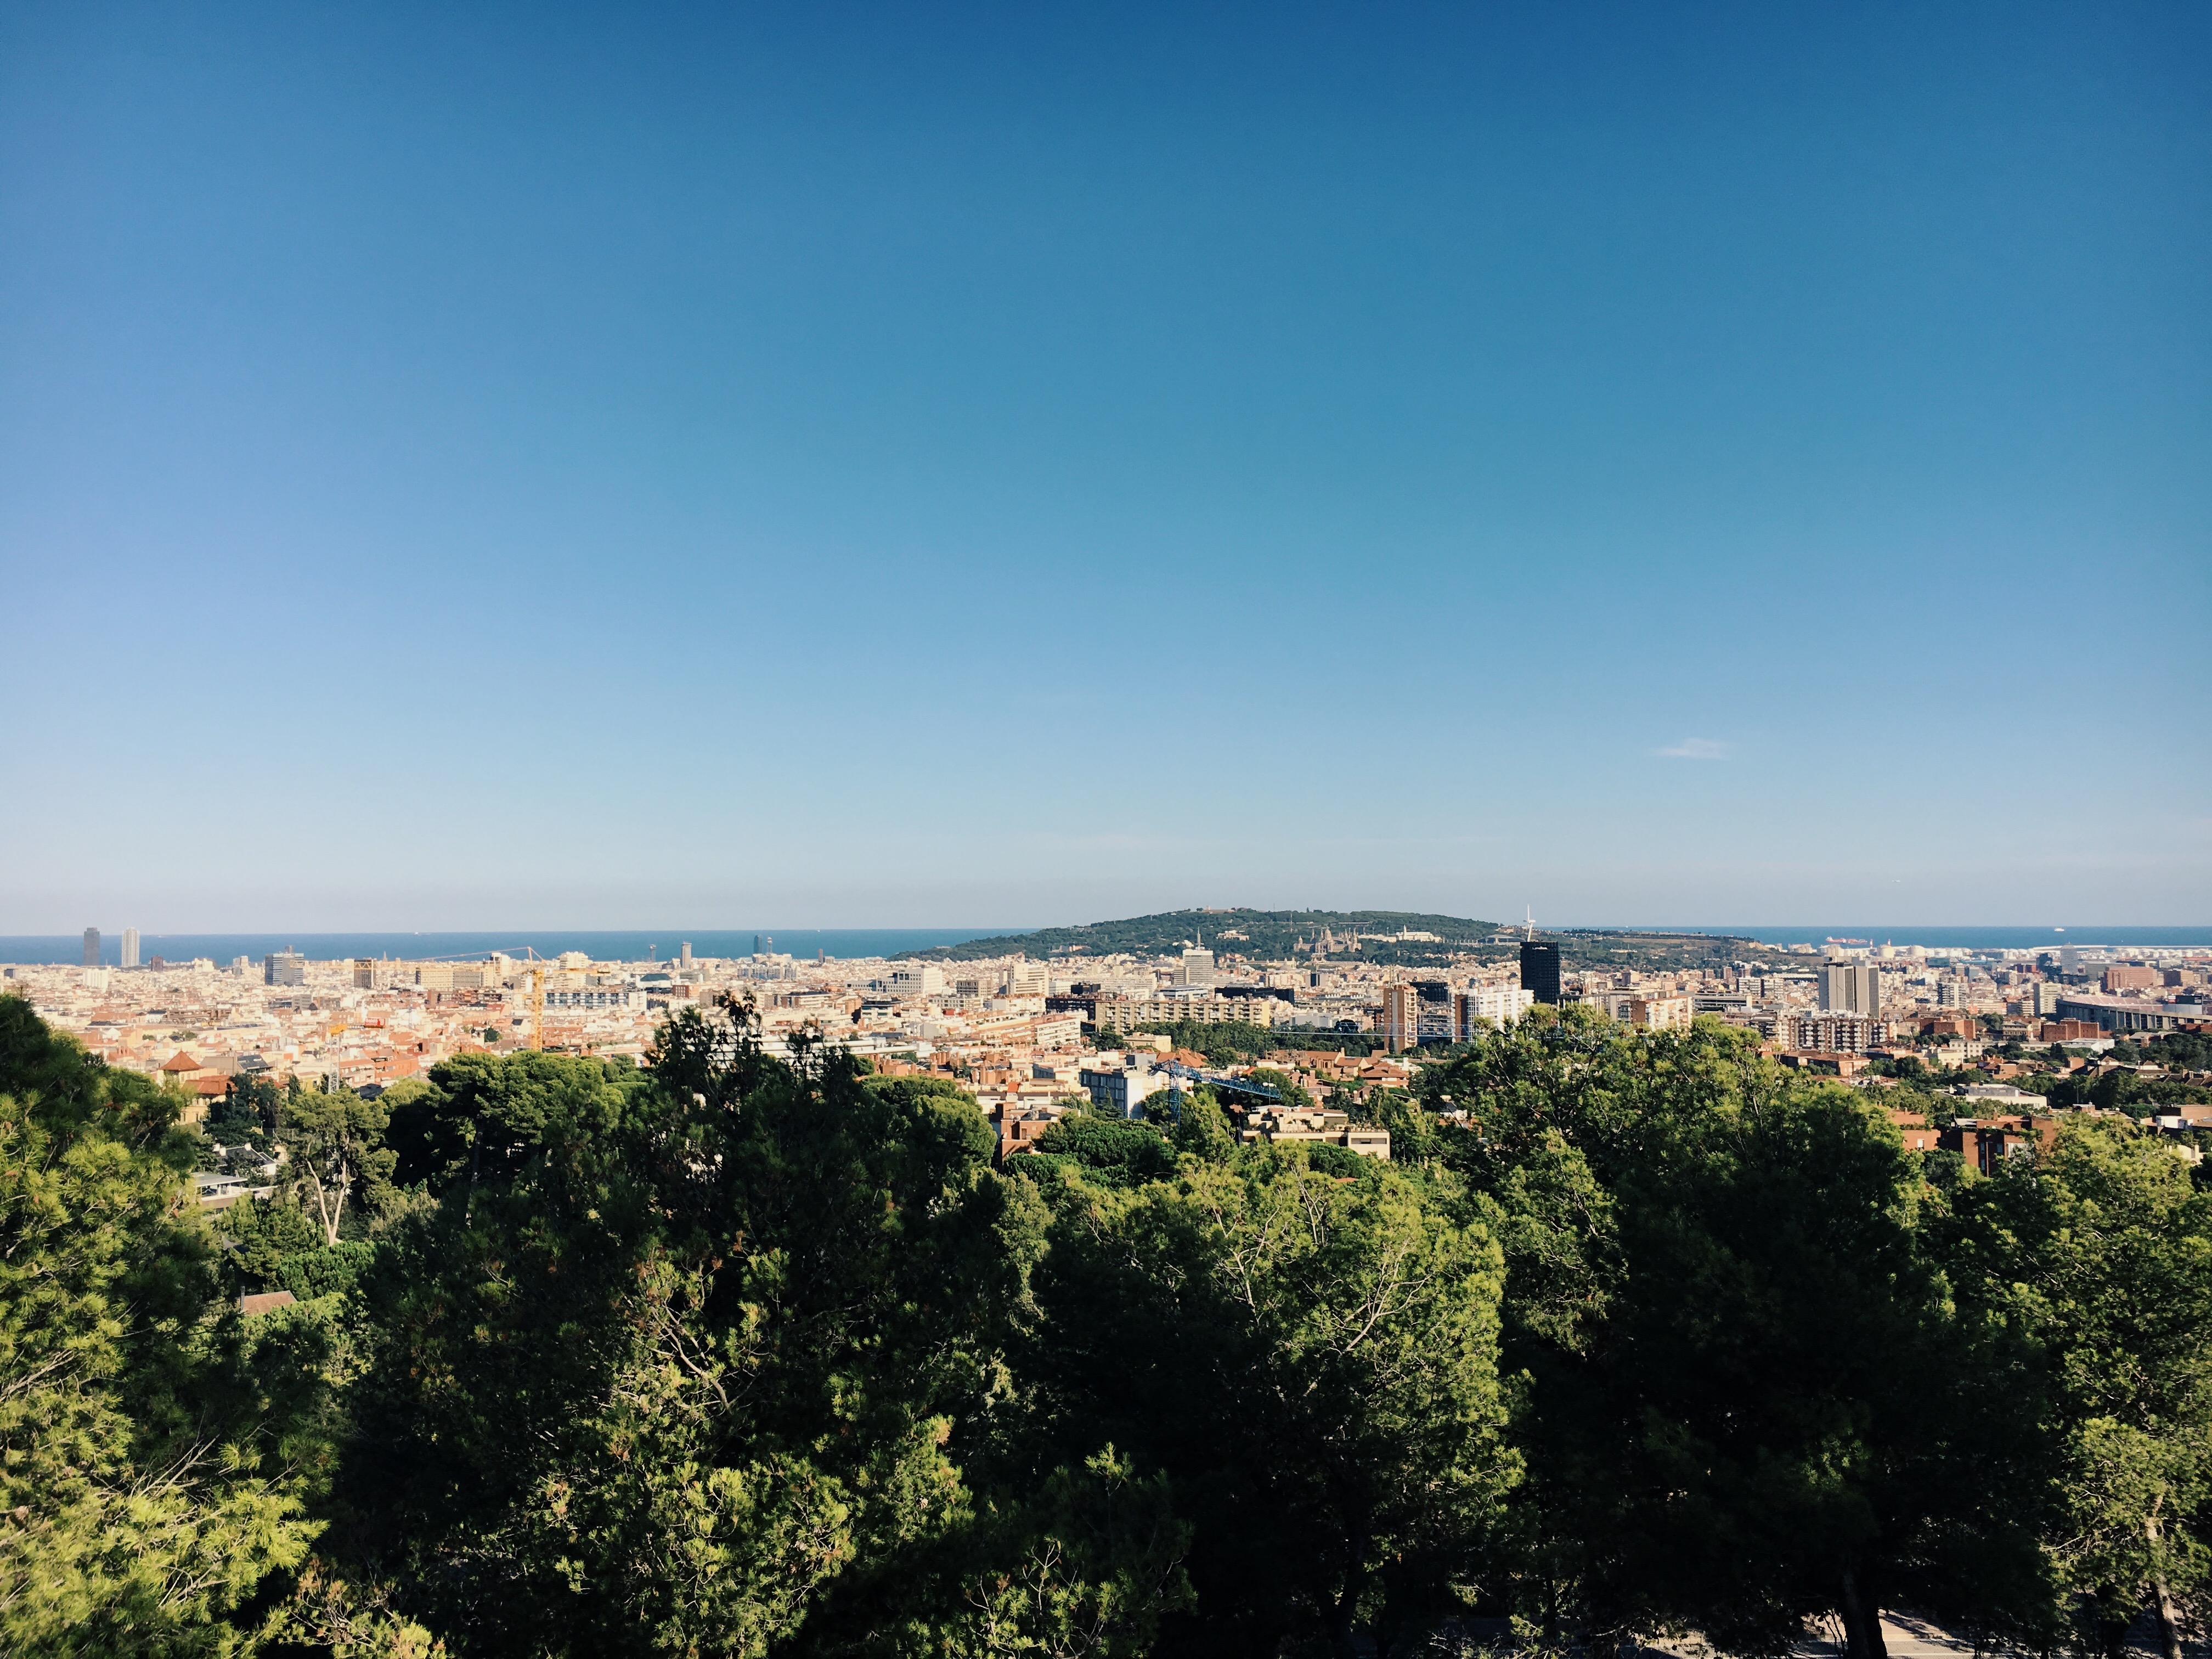 Things To Do in Barcelona with Kids